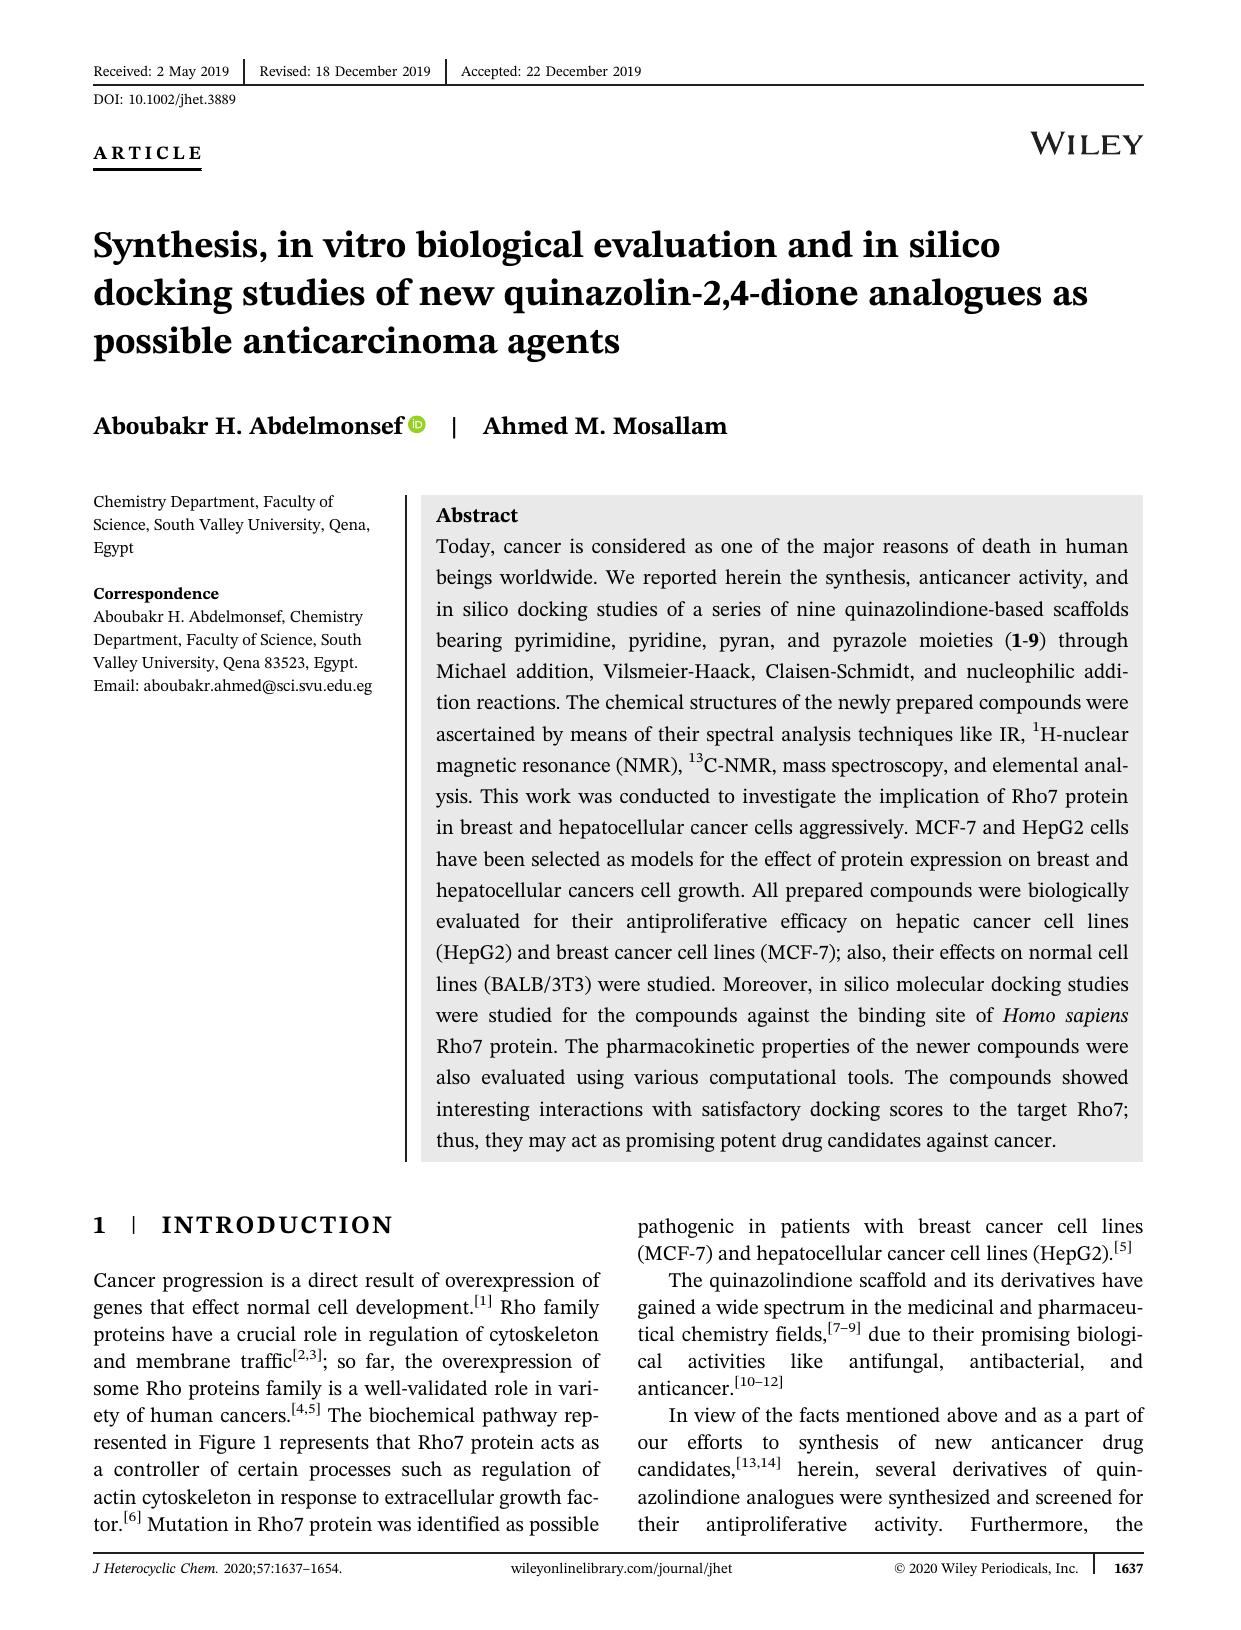 Synthesis, Invitro biological evaluation and Insilico docking studies of new Quinazolin-2,4-dione analogues as possible anticarcinoma agents by Unknown